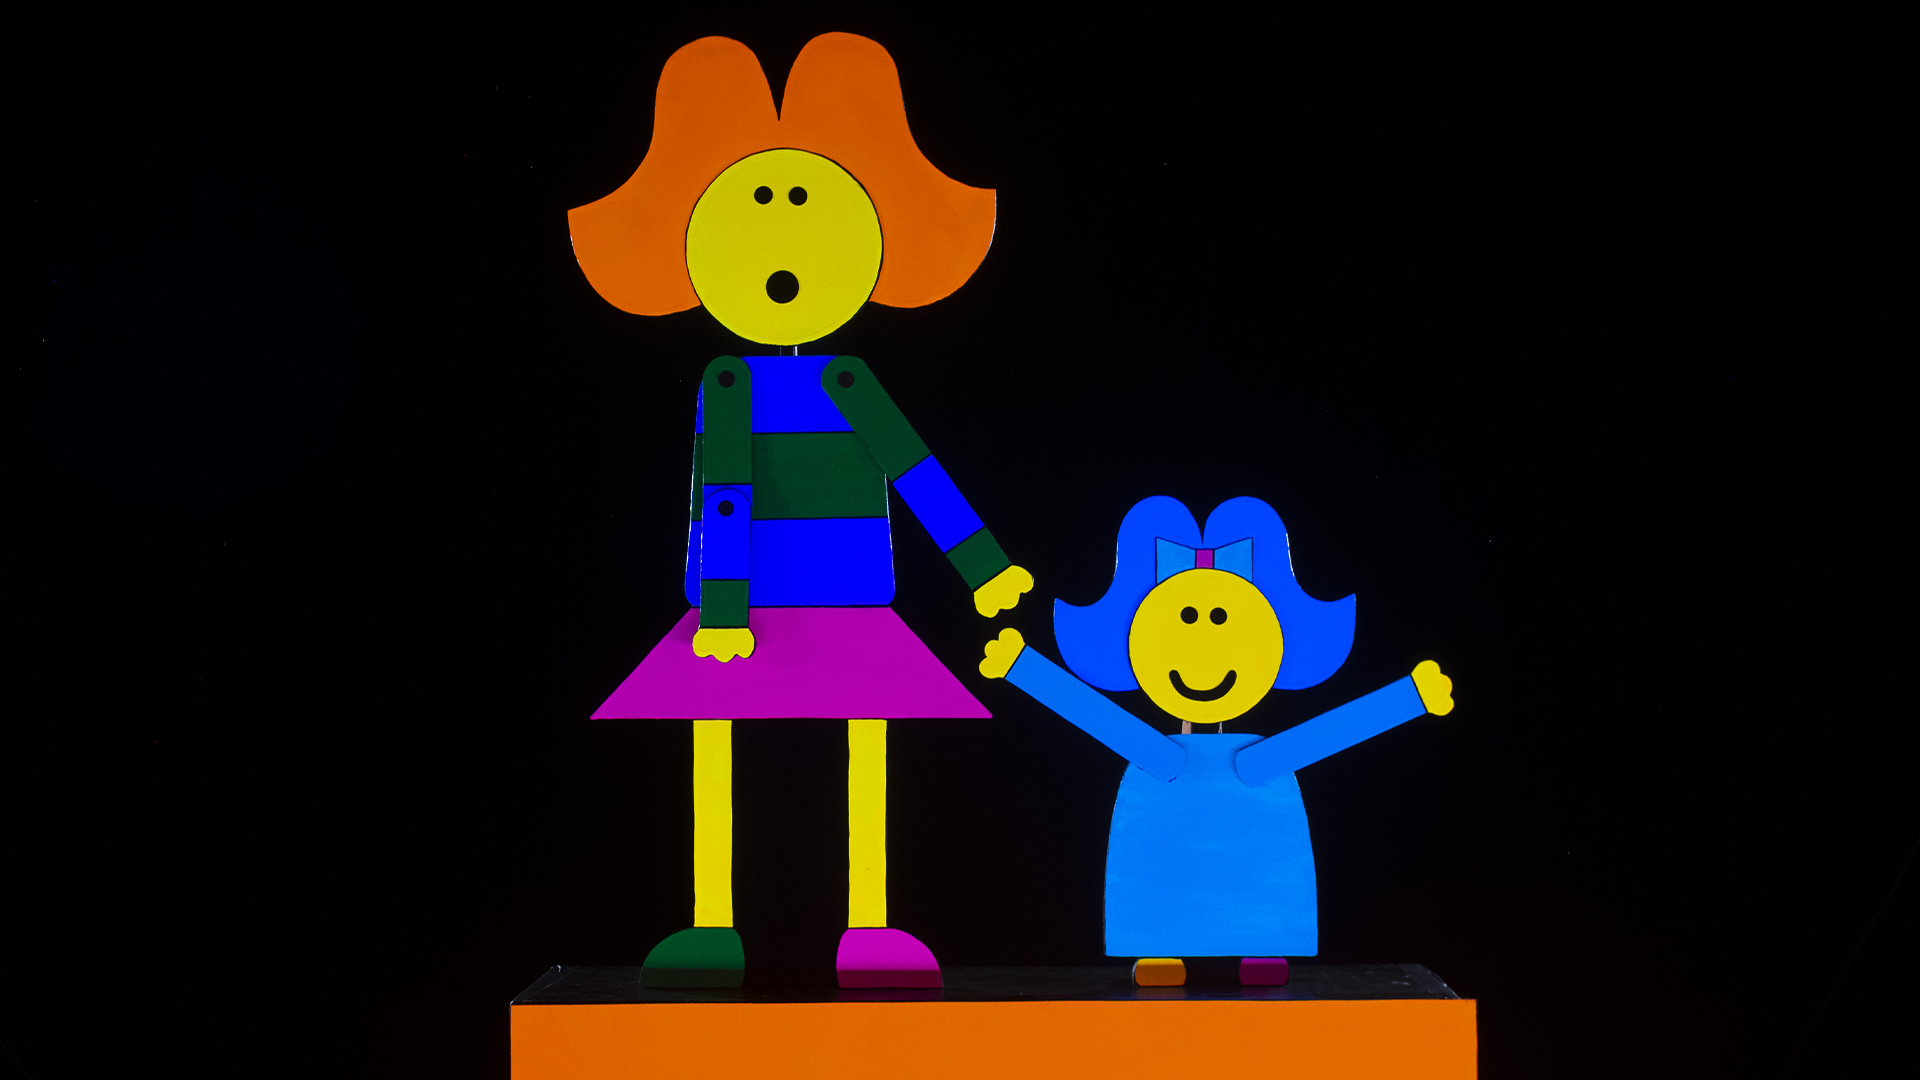 Two colorful, illustrated figures hold hands